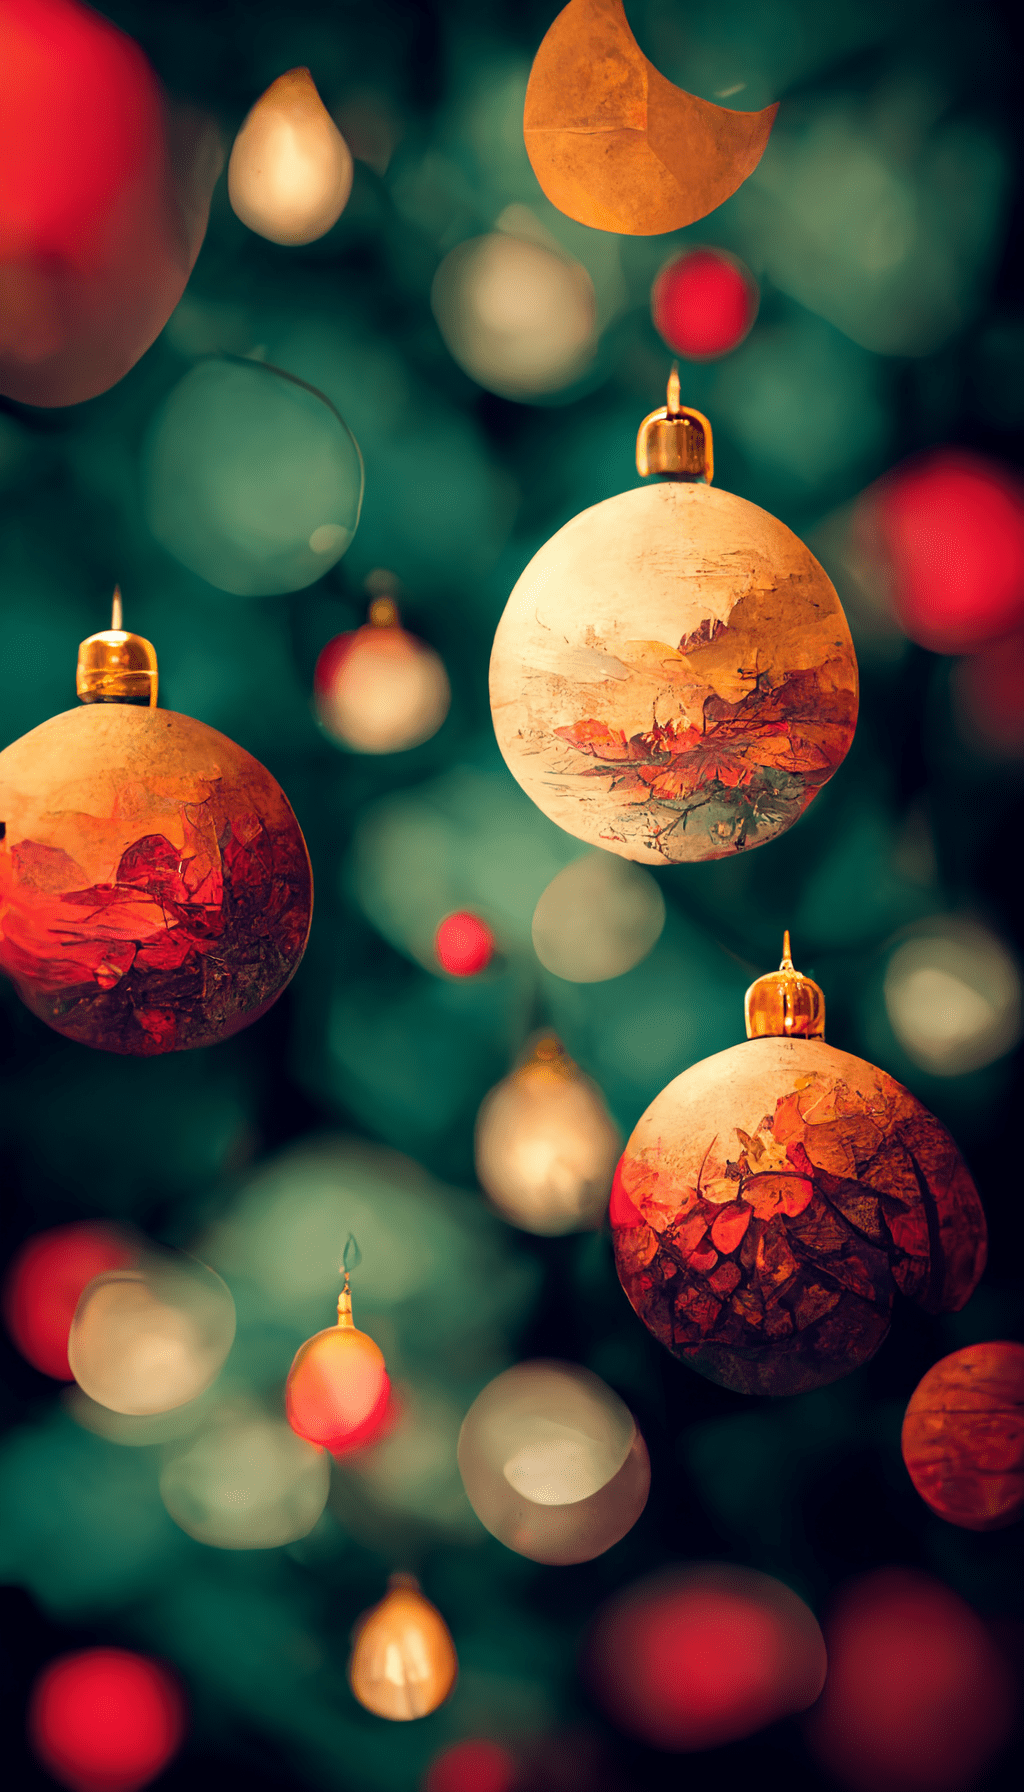 Magic live christmas wallpapers for phone